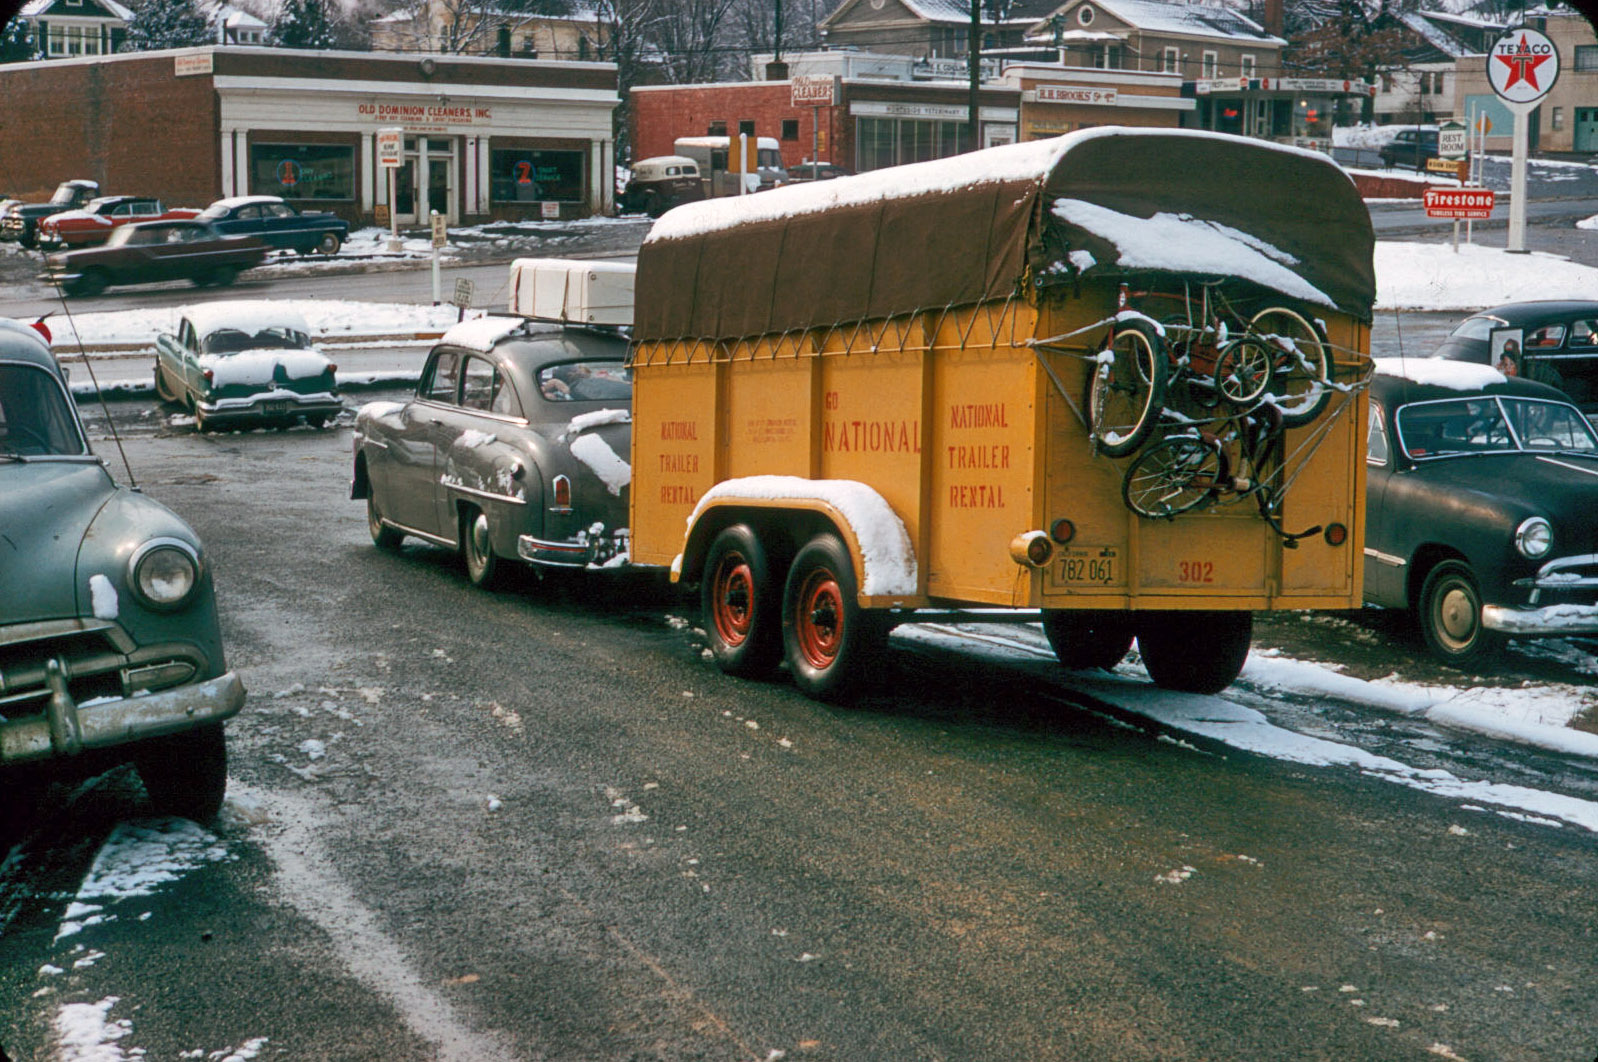 Taken at the end of December in Arlington, Virginia, as we hauled our belongings behind our 1950 Dodge, heading to our new home in West Palm Beach. Image is from a Kodachrome slide, taken by my grandfather. View full size.